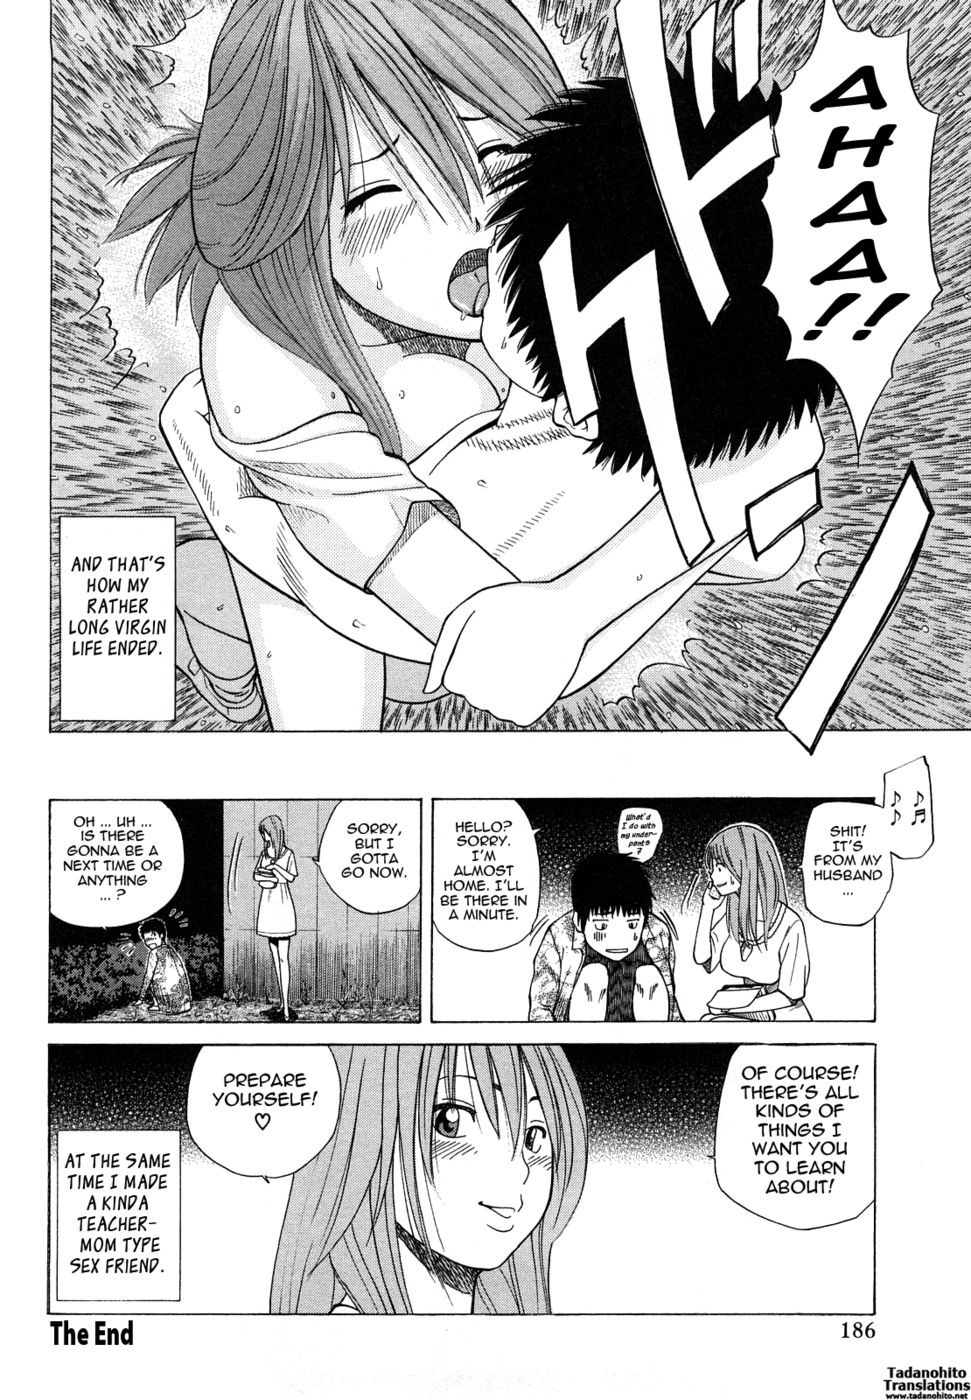 Young Wife and High School Girl Collection-Chapter 10-Virgin Boy Complex-Hentai Manga Hentai Comic pic